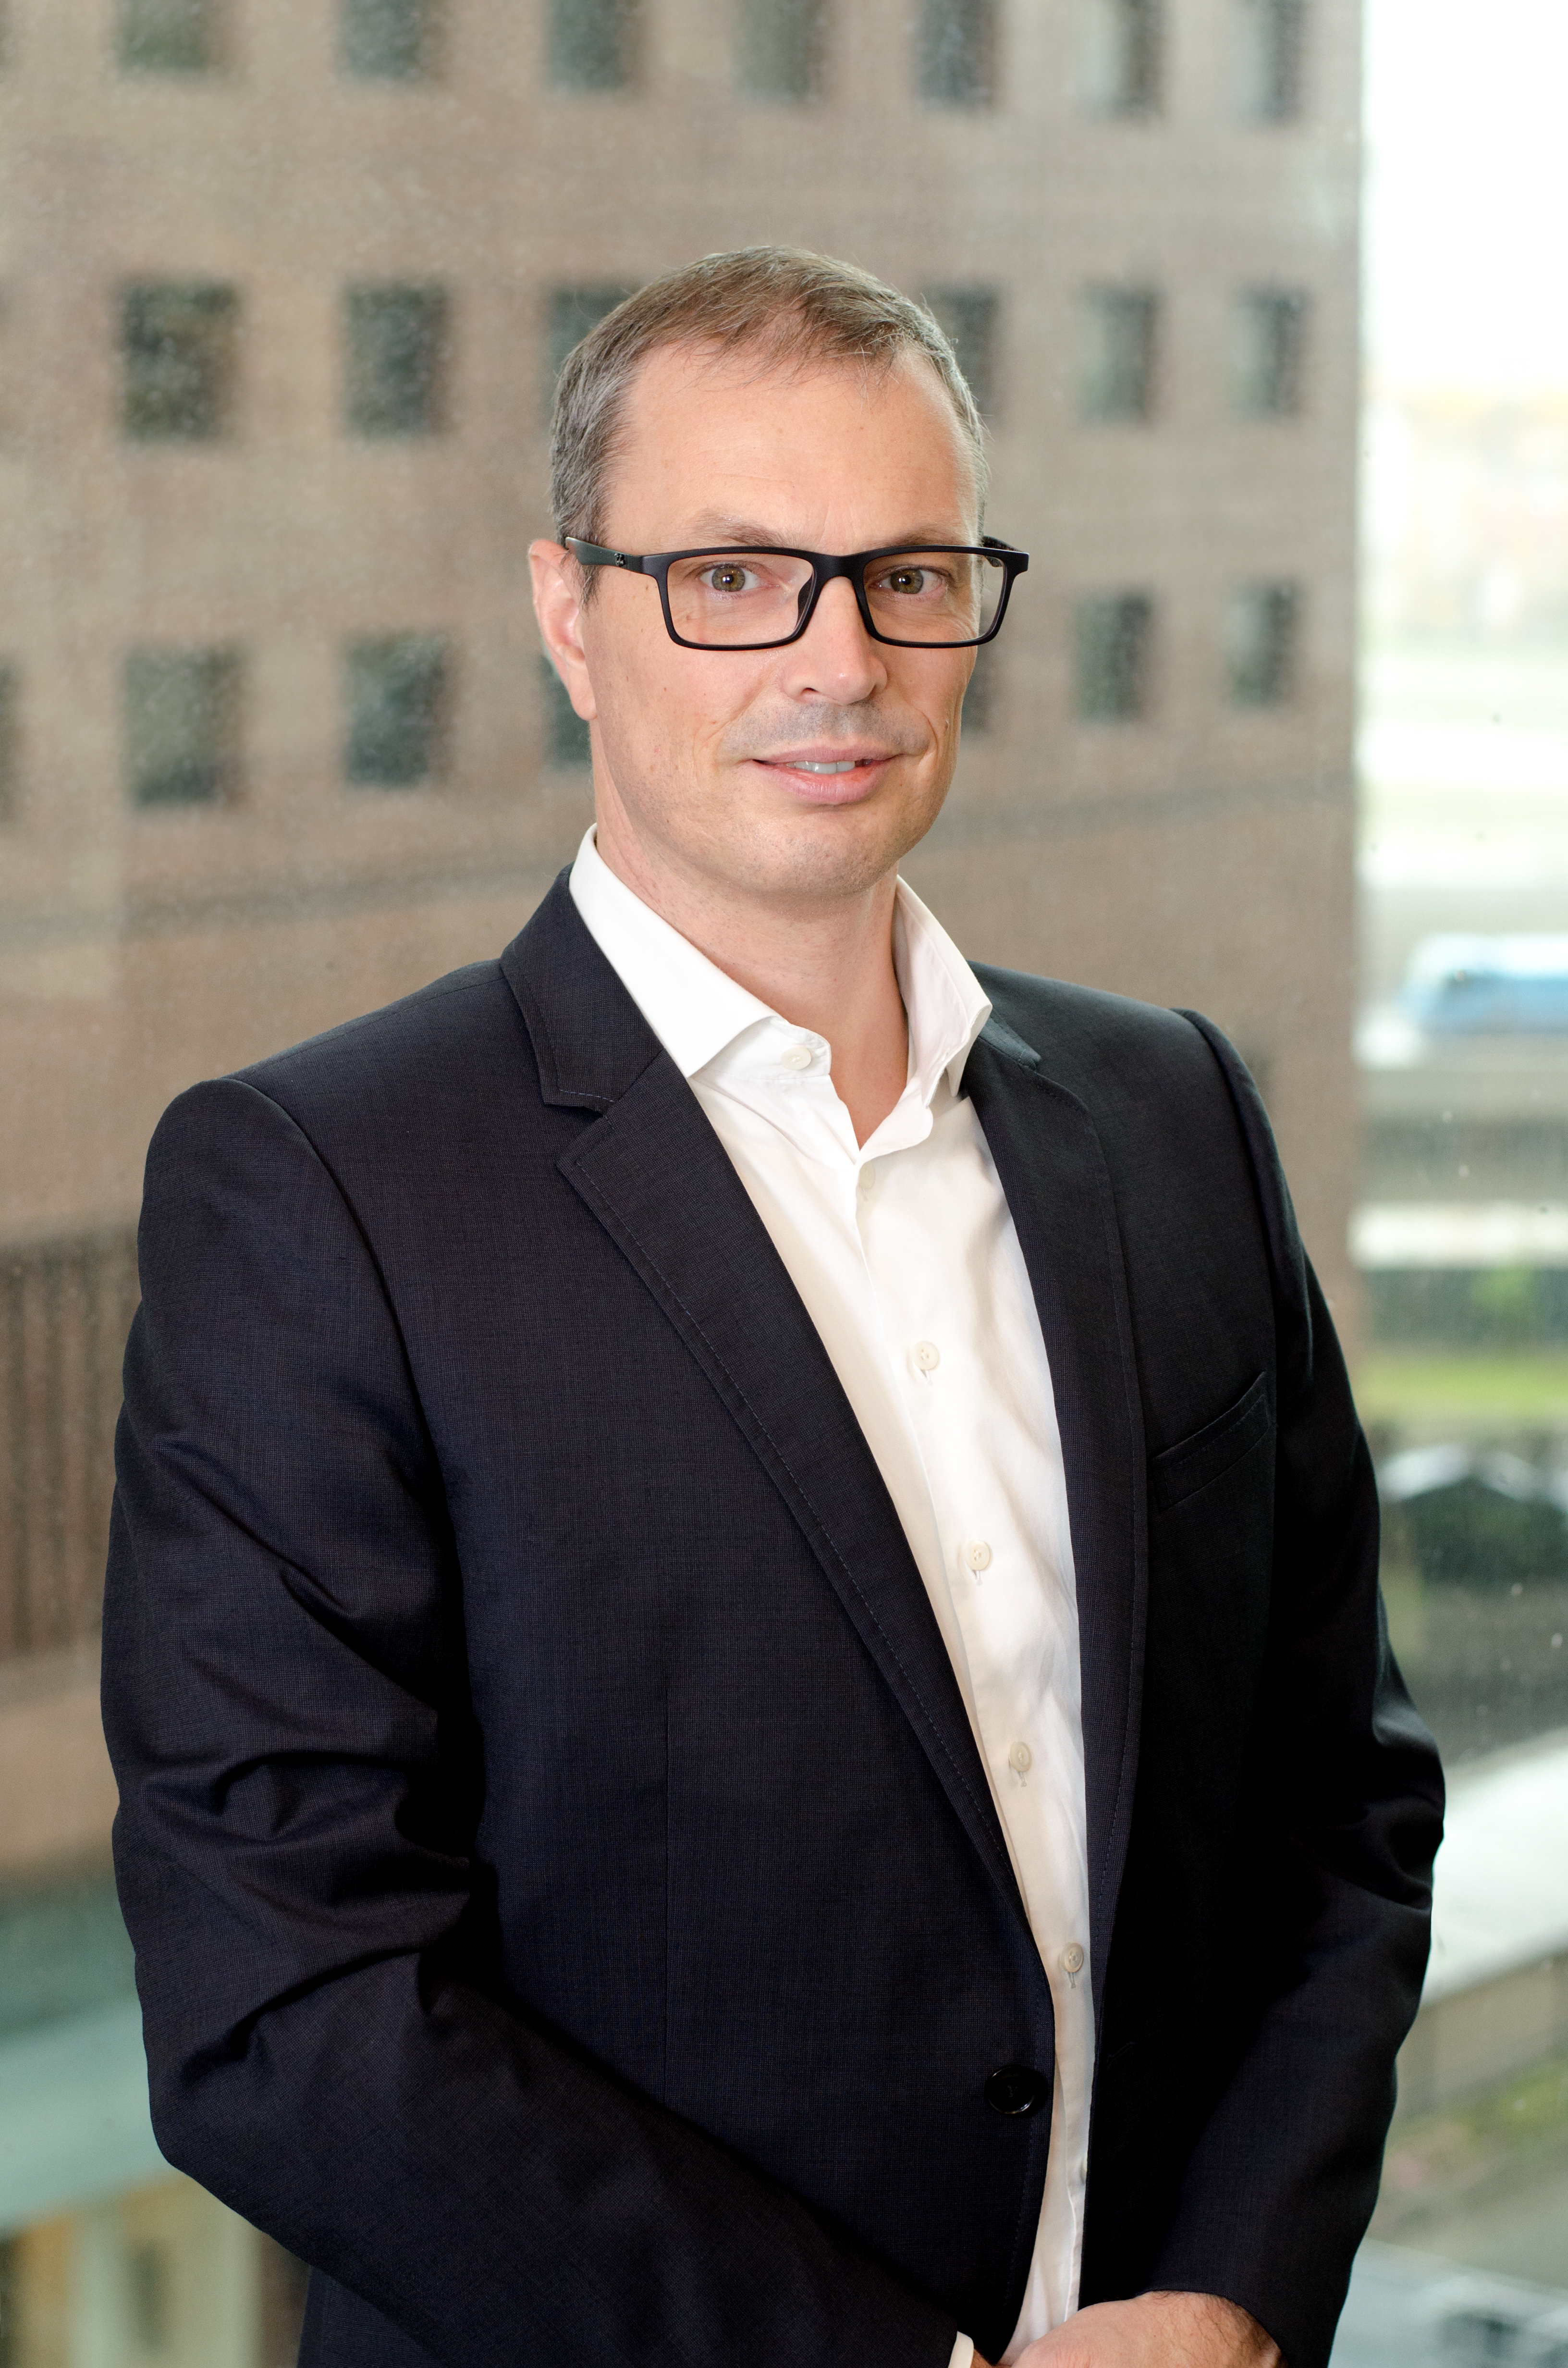 Peter De Caluwe, the chief executive officer of cross-borders payment network Thunes